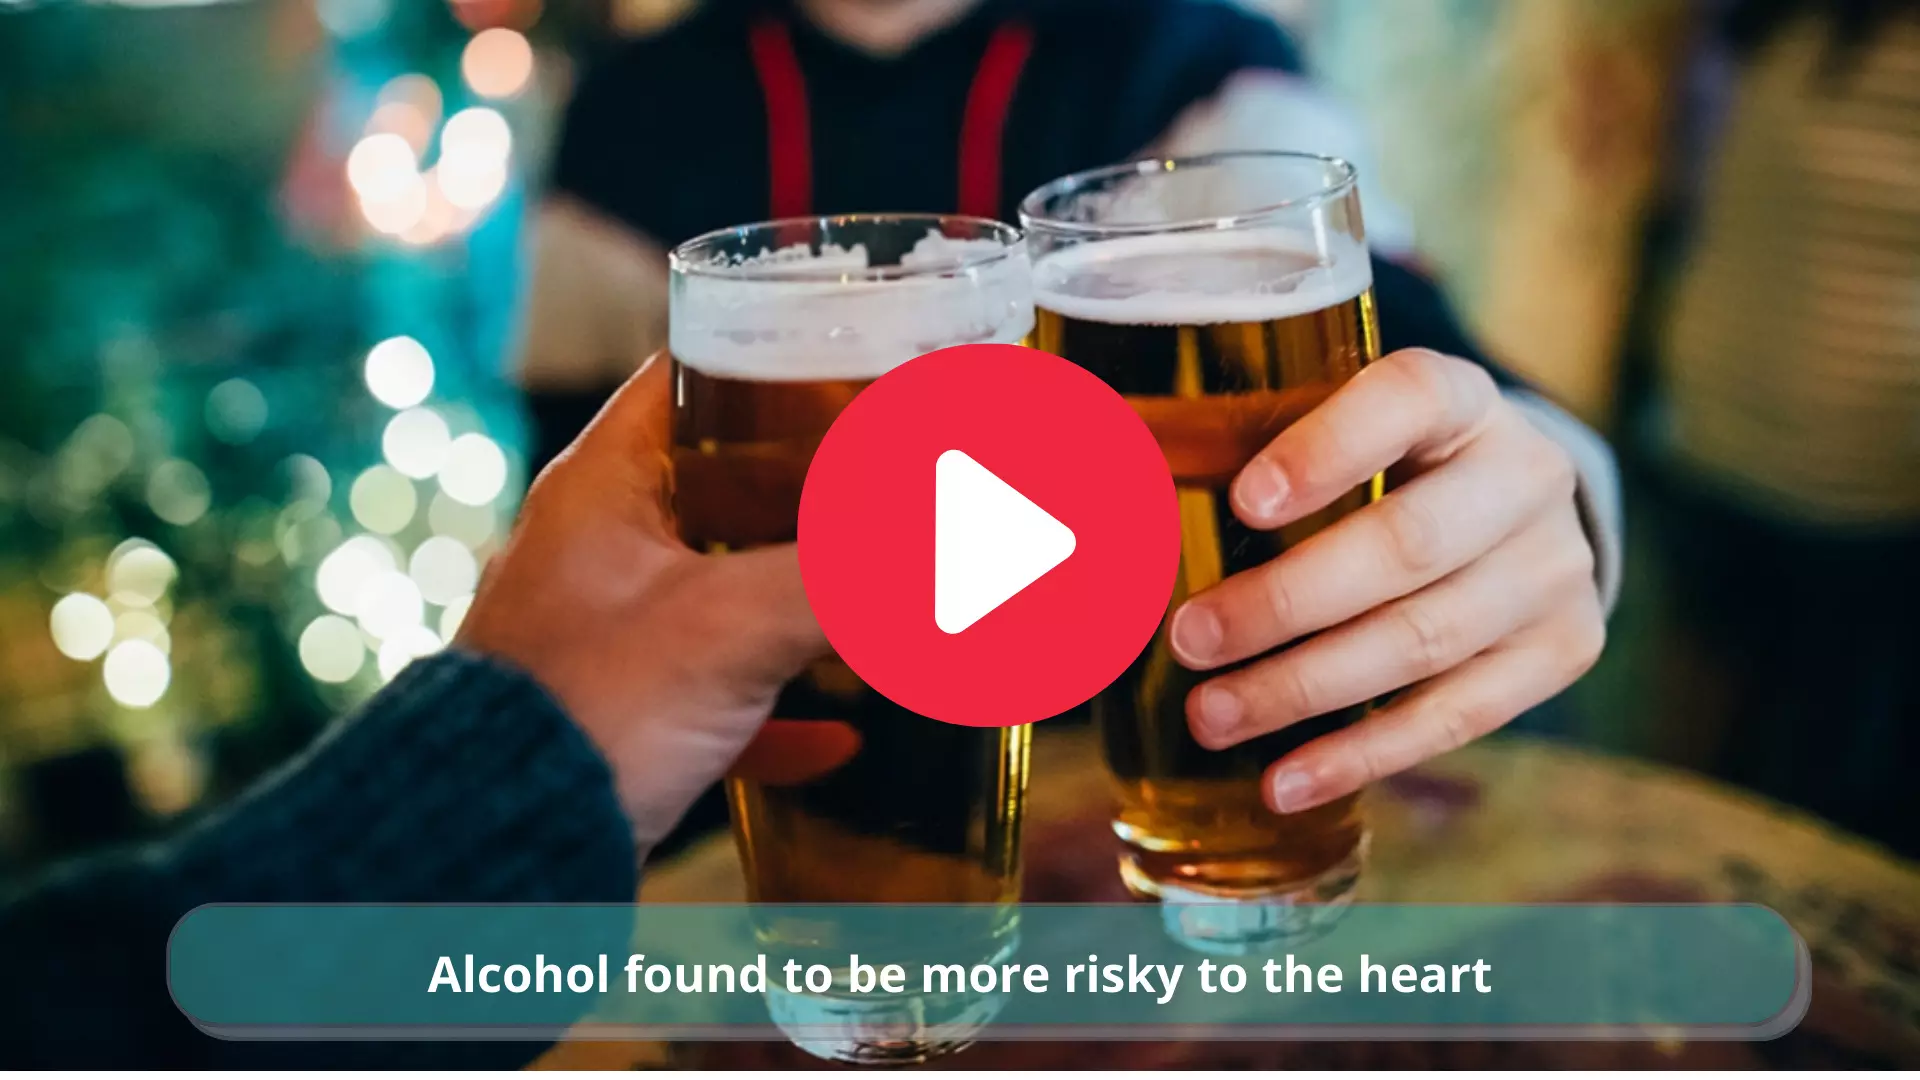 Alcohol found to be more risky to the heart